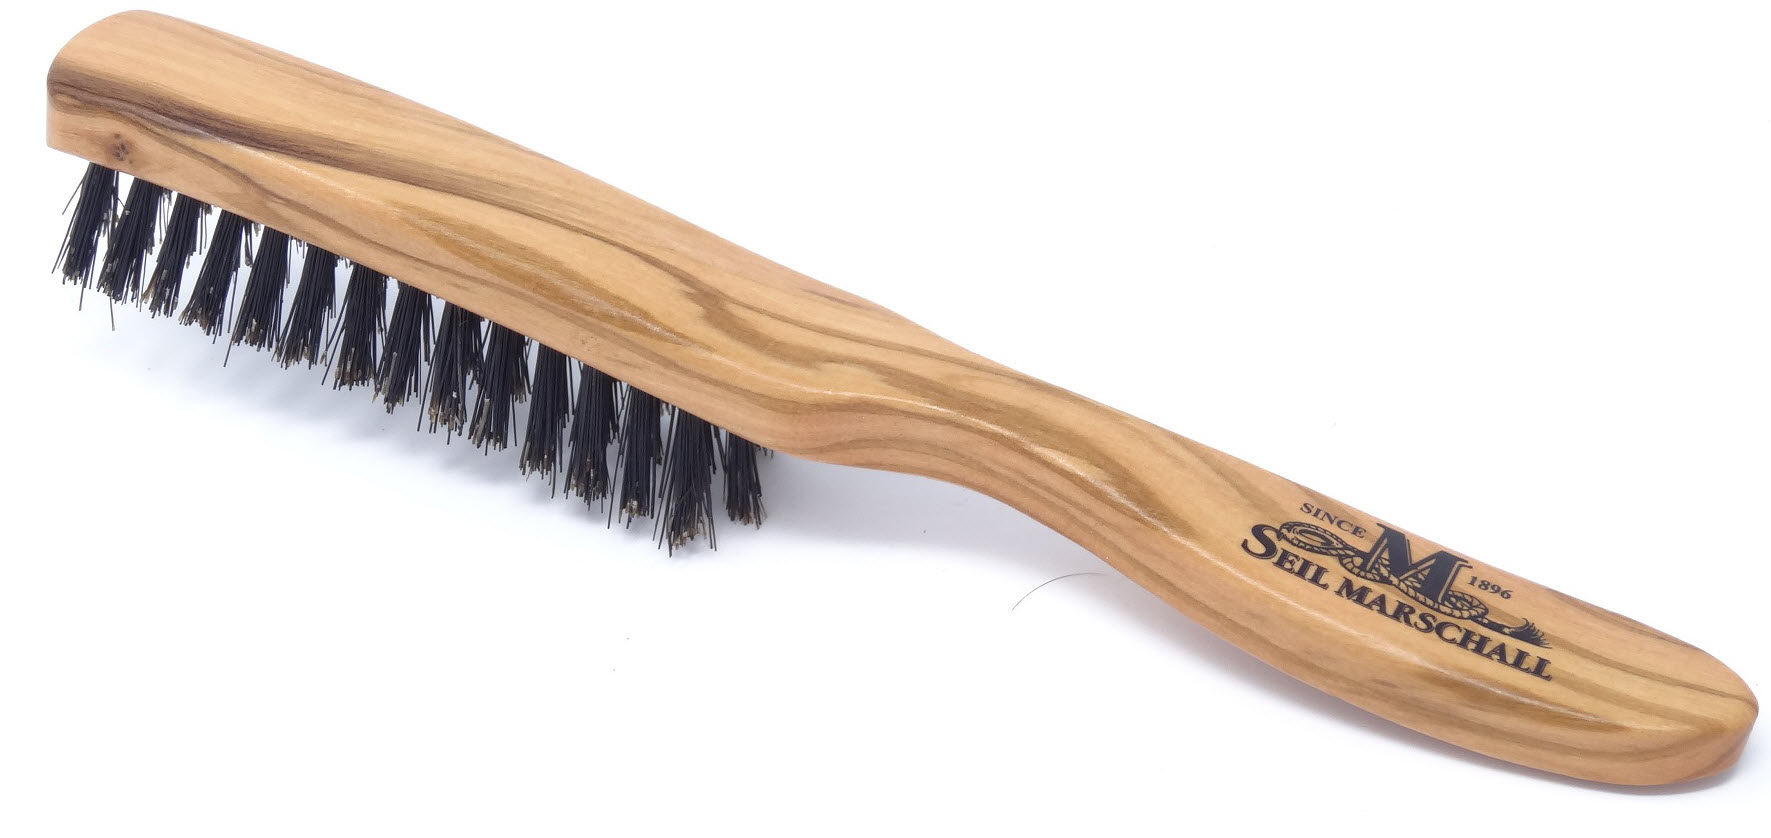 Hairbrush made from Olivewood